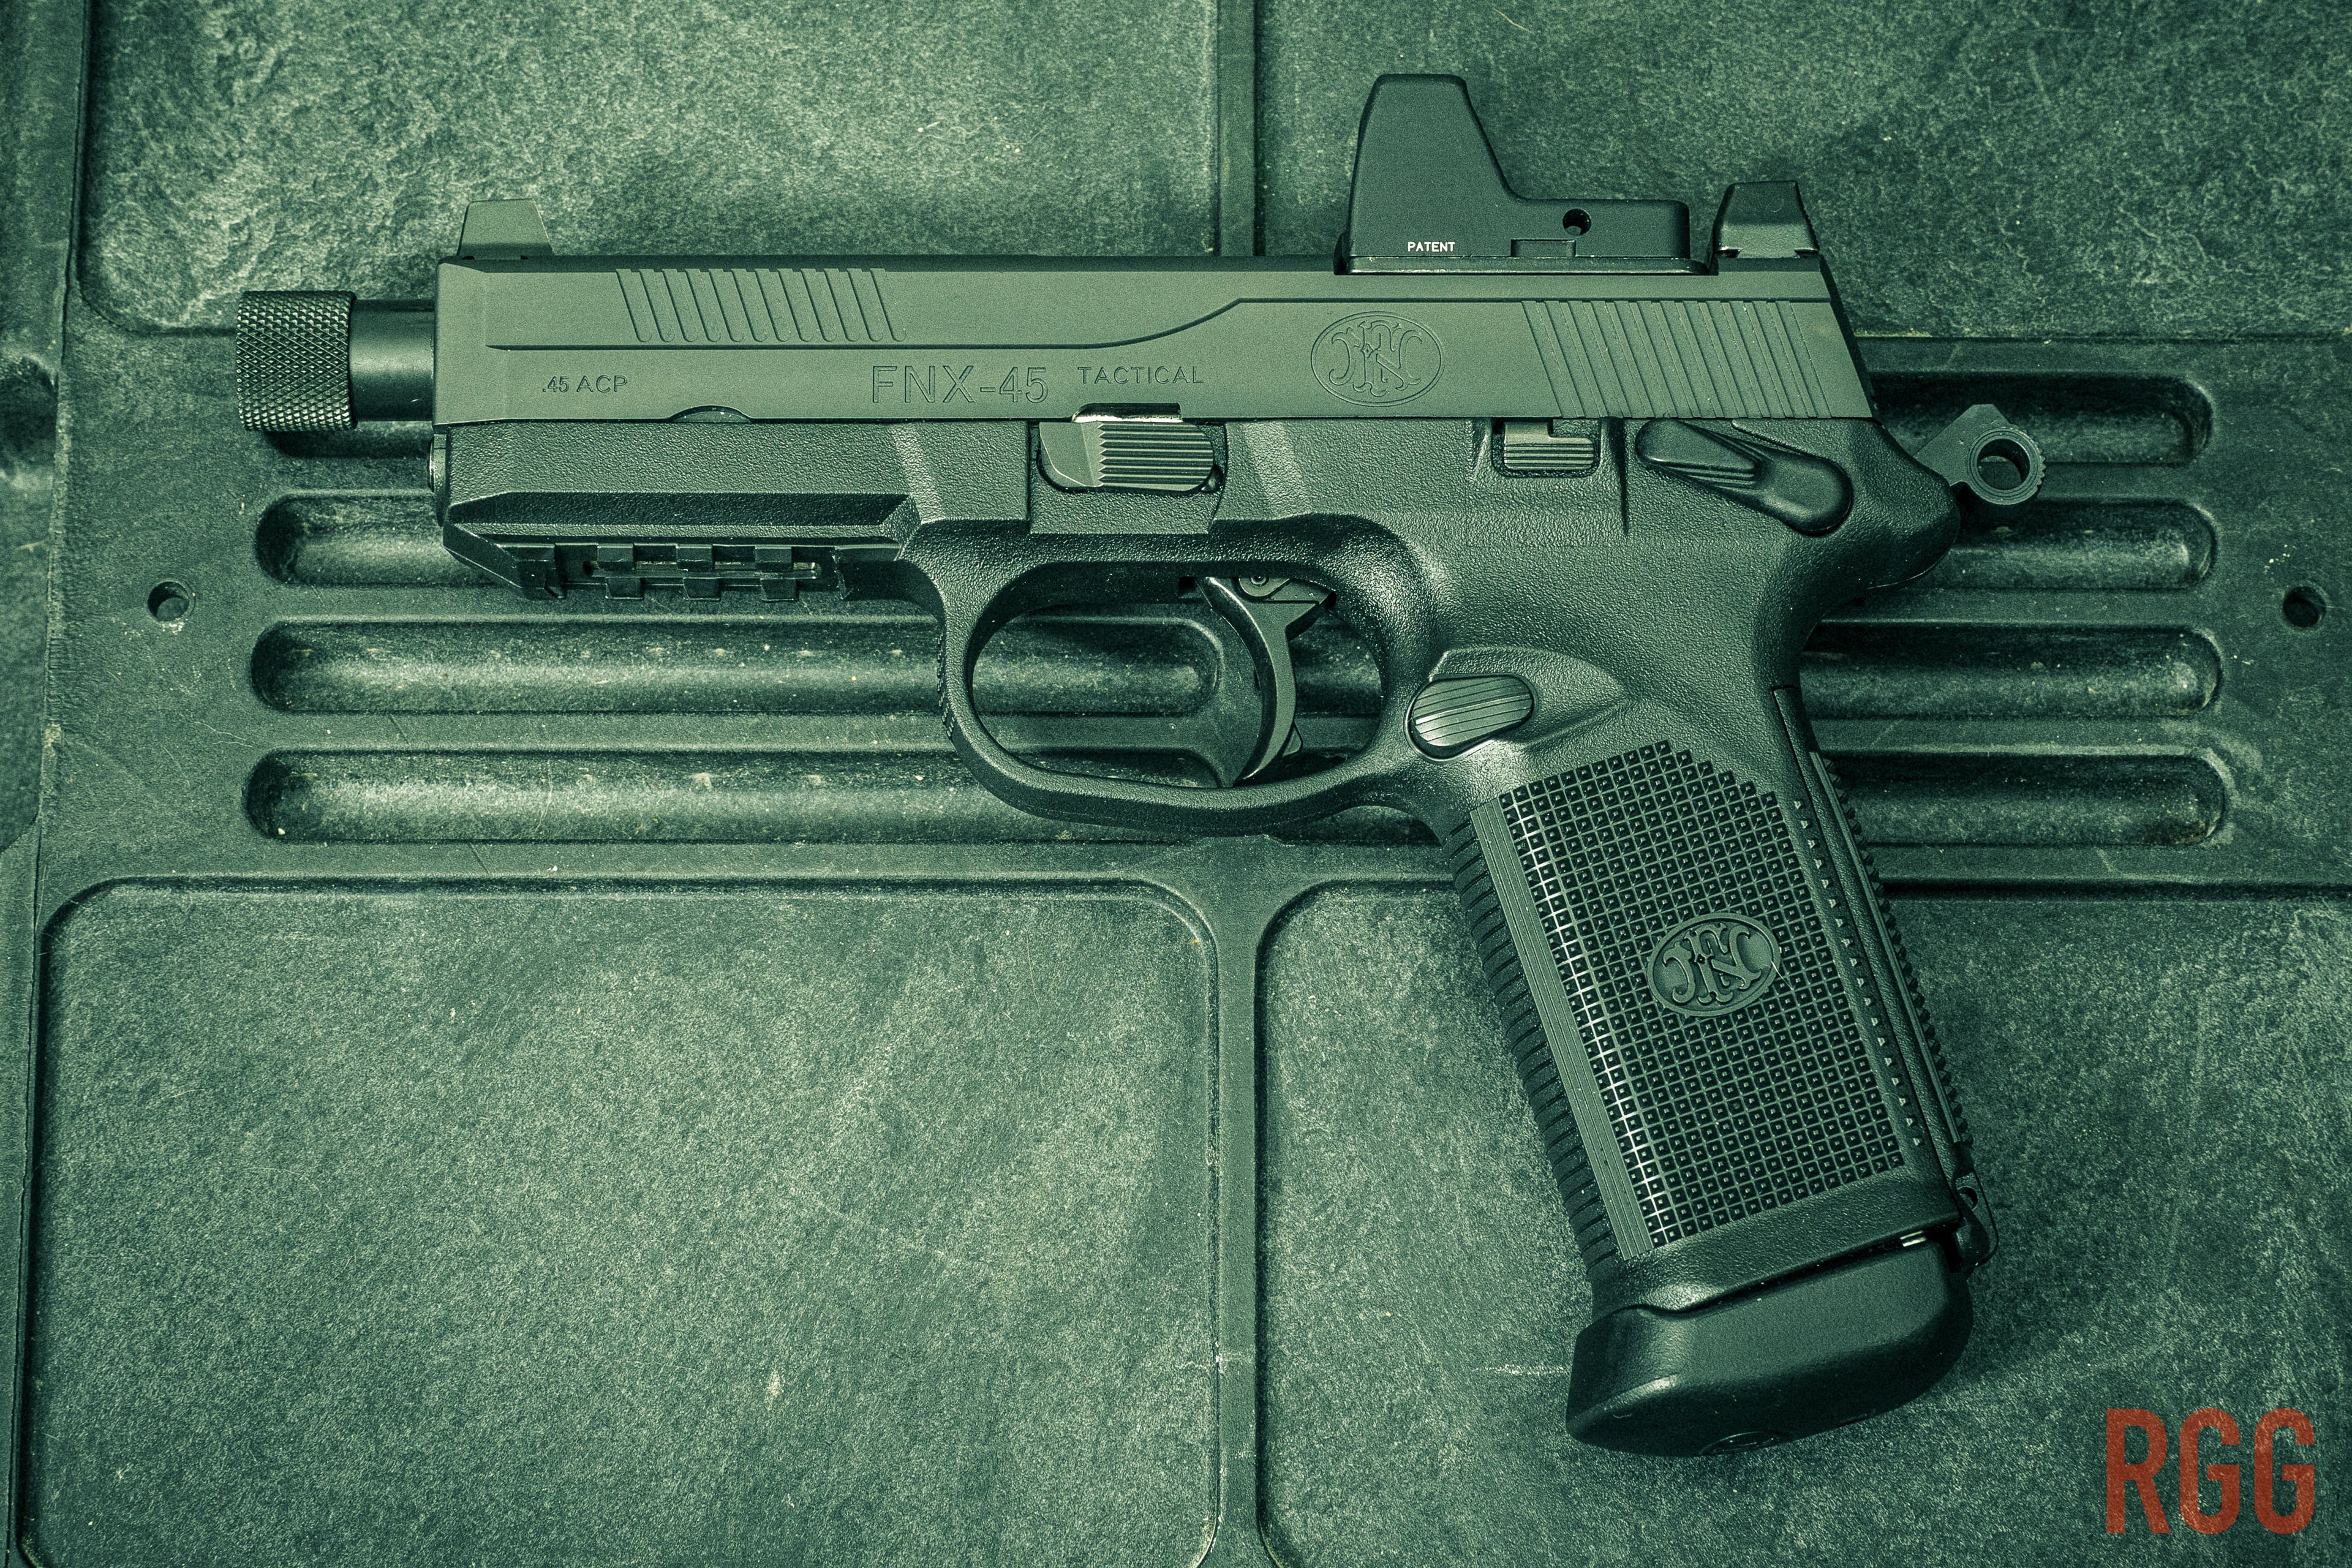 If someone gifted me an FNX-45 Tactical - I wouldn't complain.